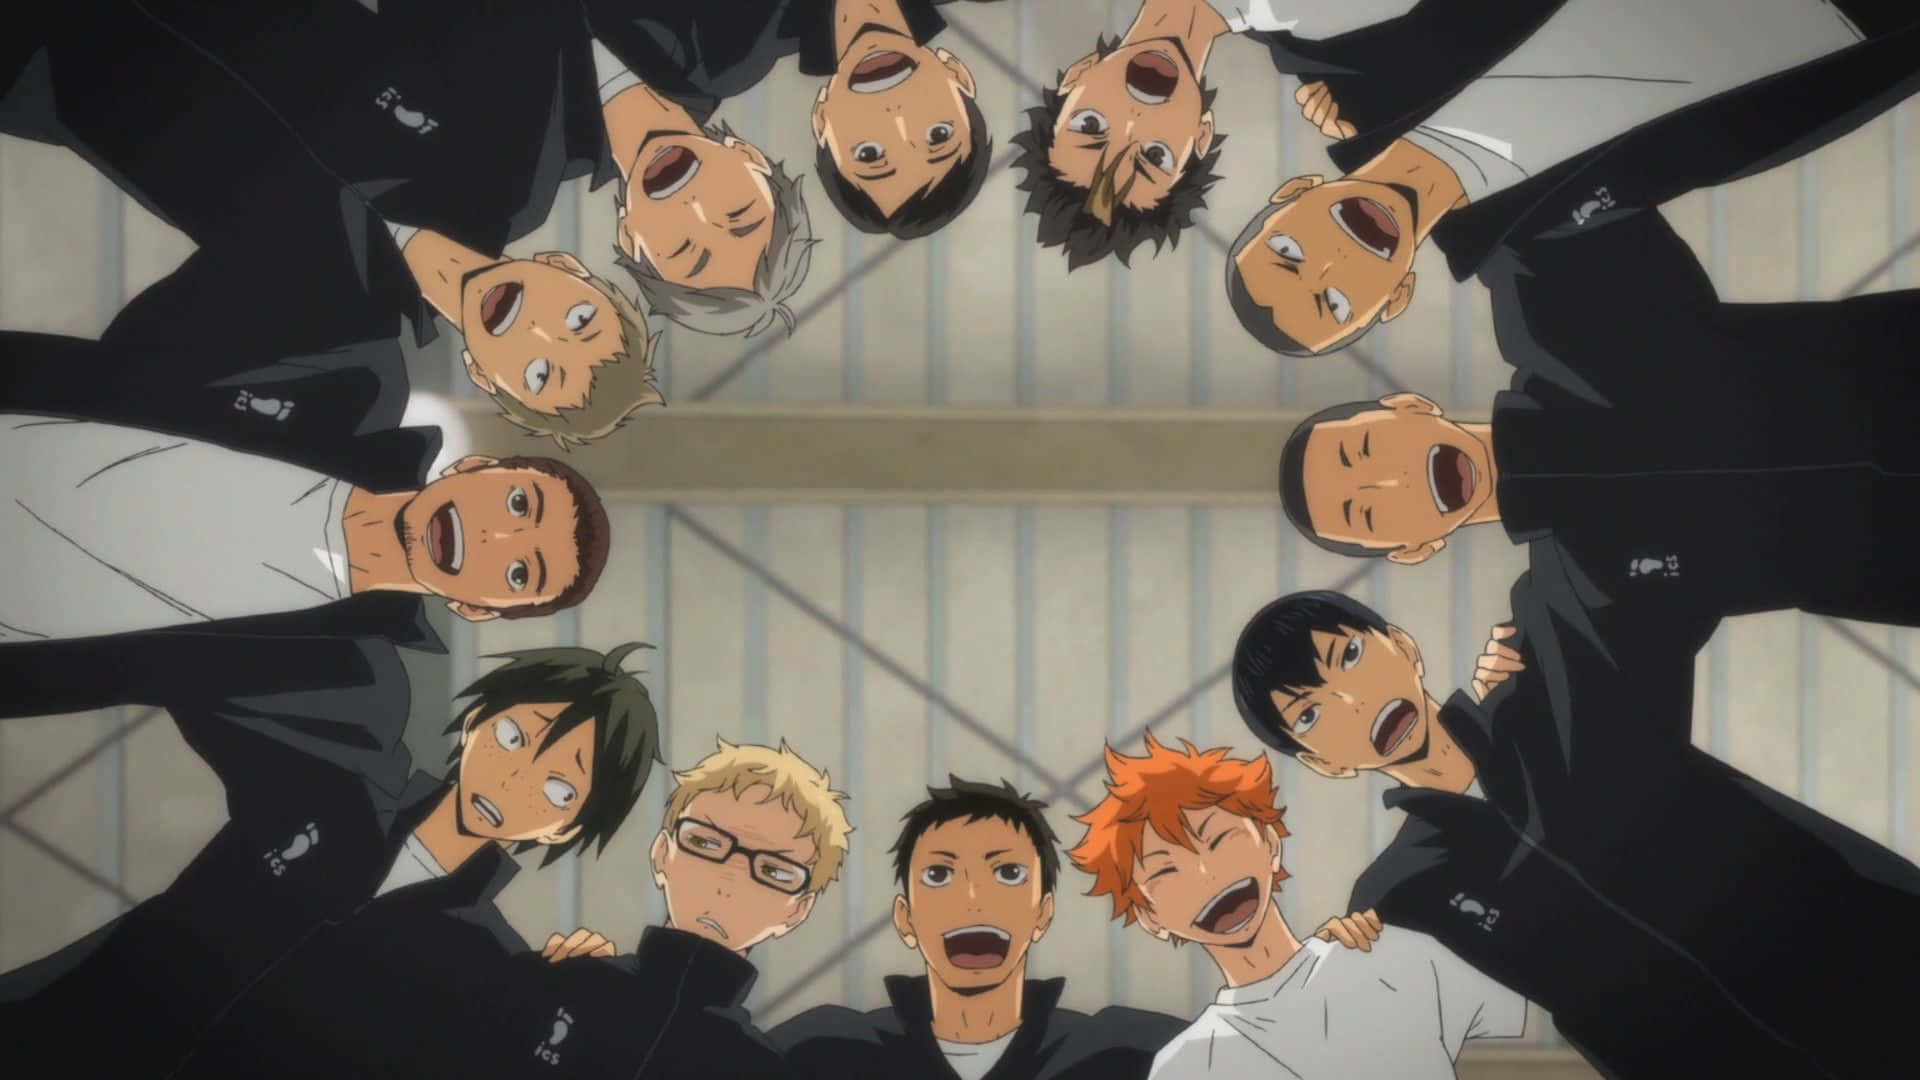 Get Creative With the Right Tool - Haikyuu Laptop Wallpaper